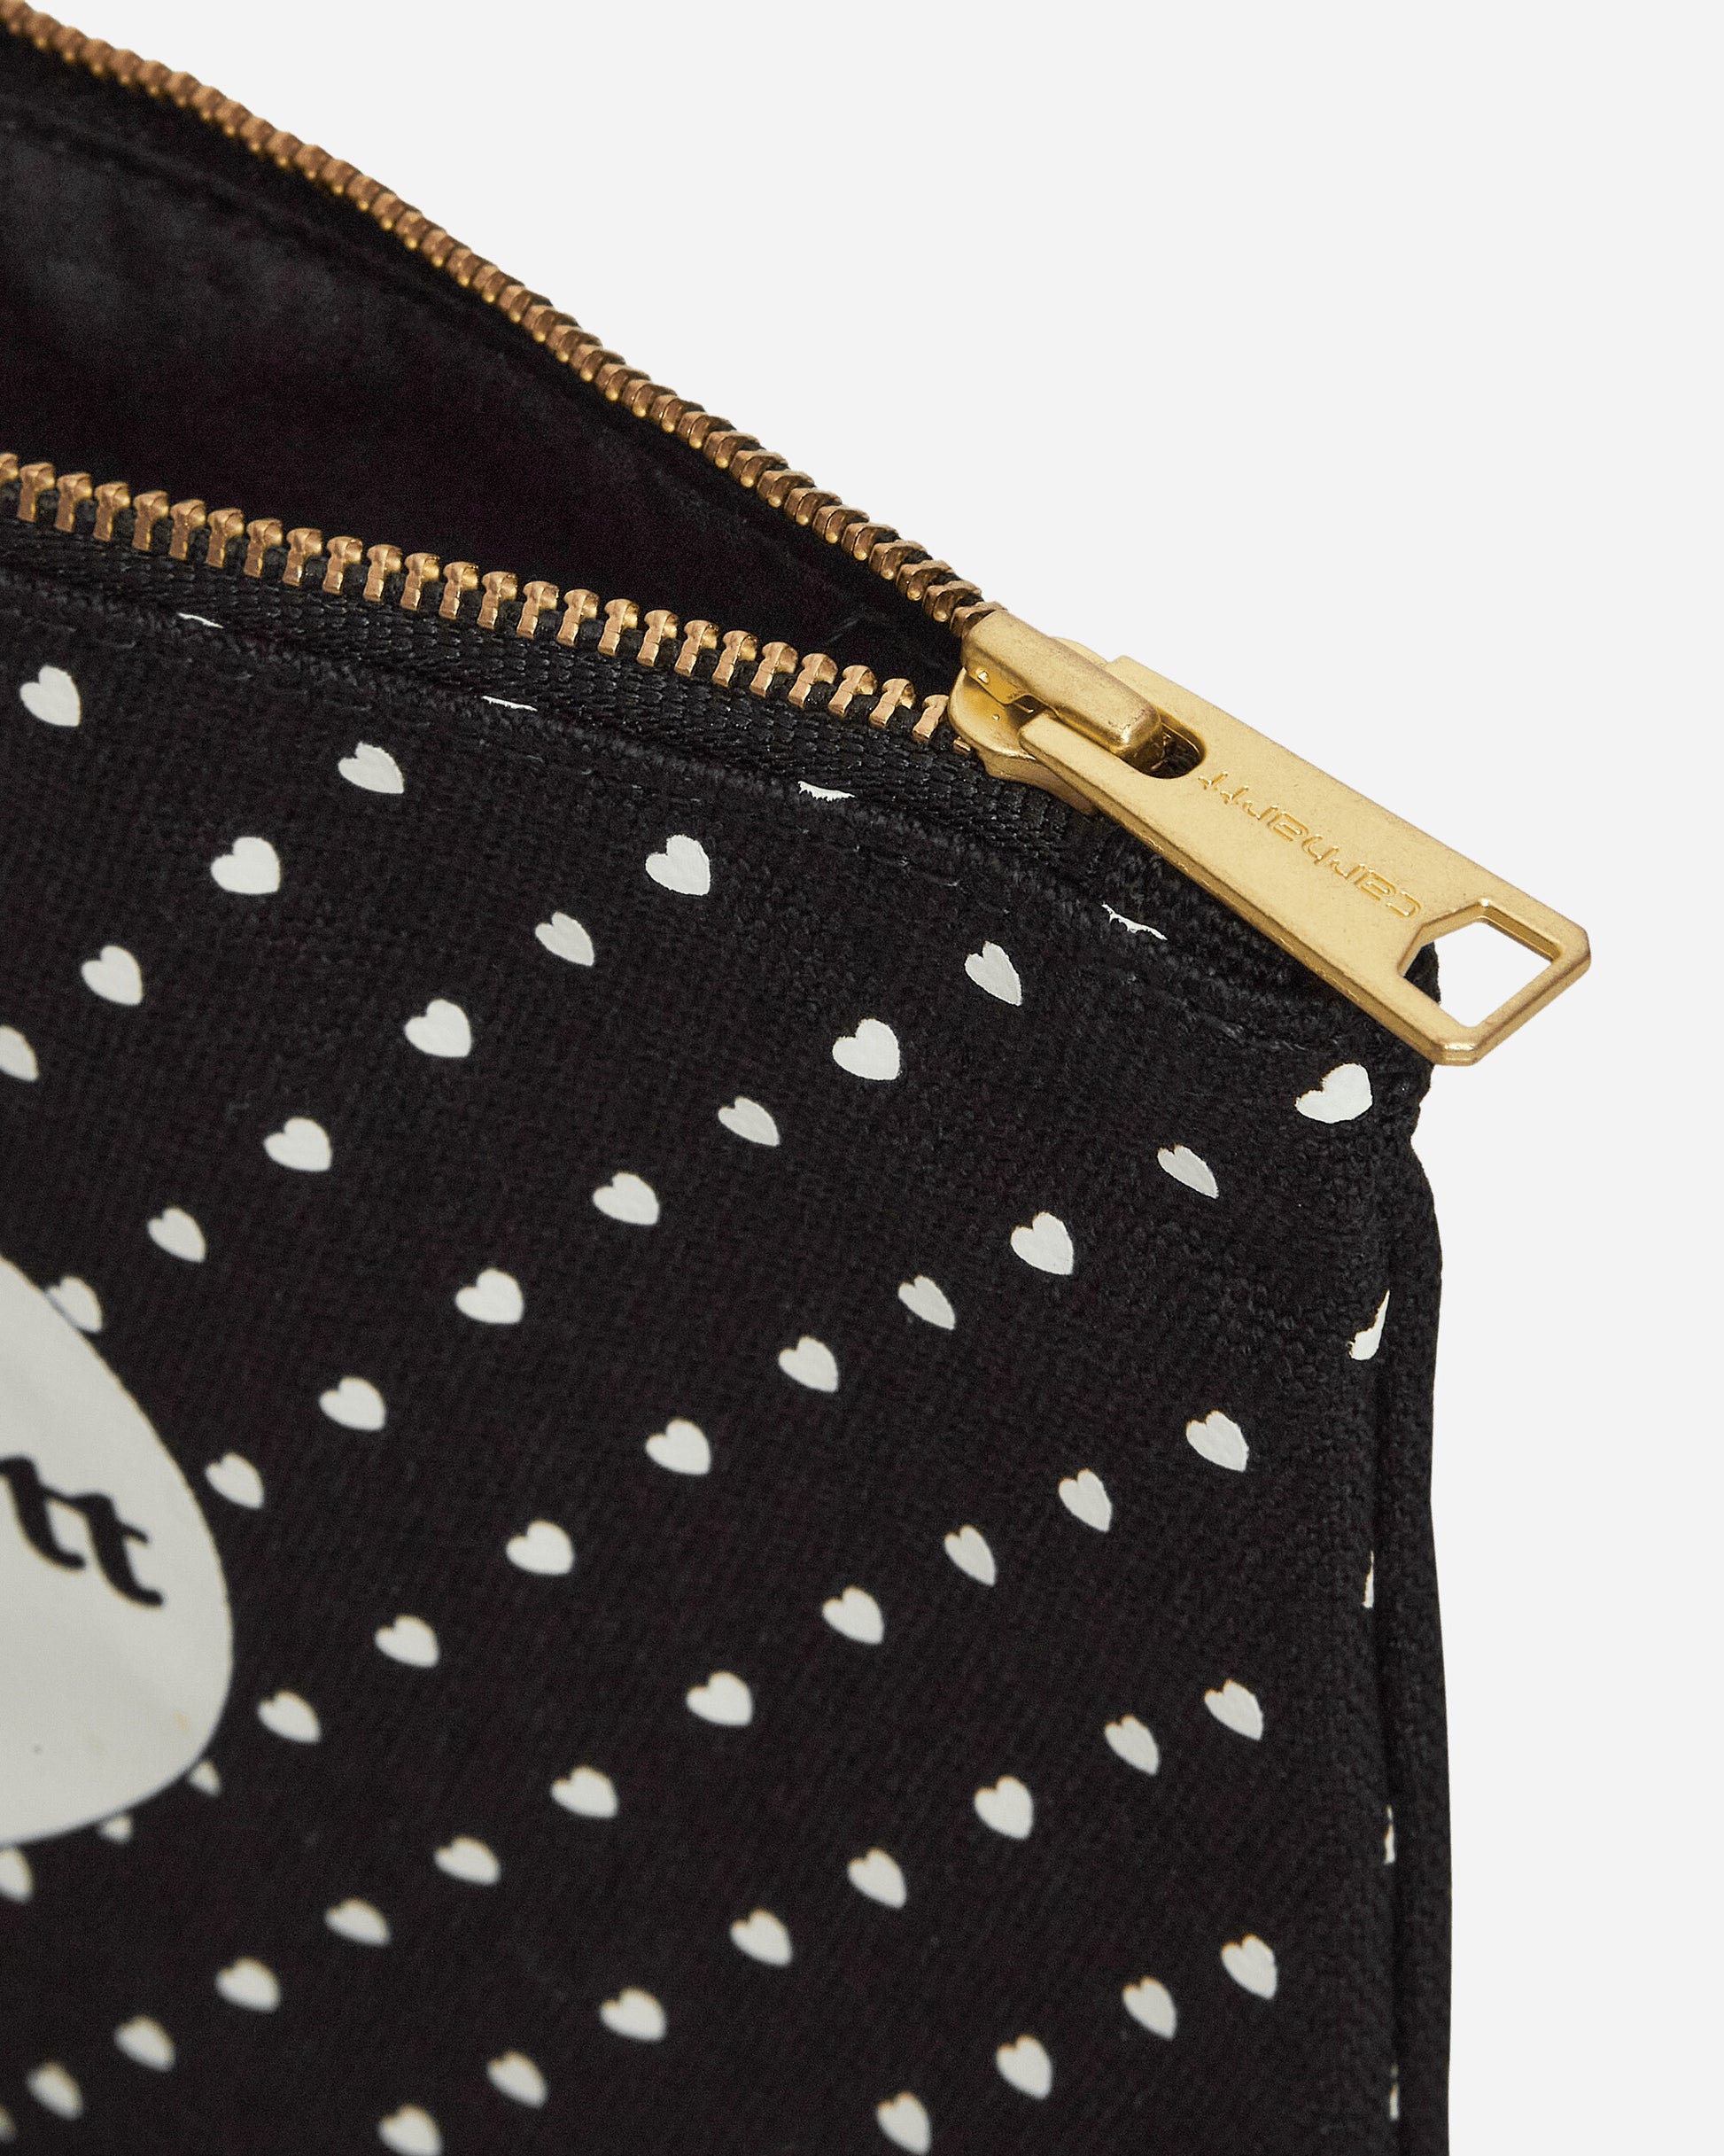 Carhartt WIP Canvas Graphic Zip Wallet Black Wallets and Cardholders Wallets I033096 24MXX